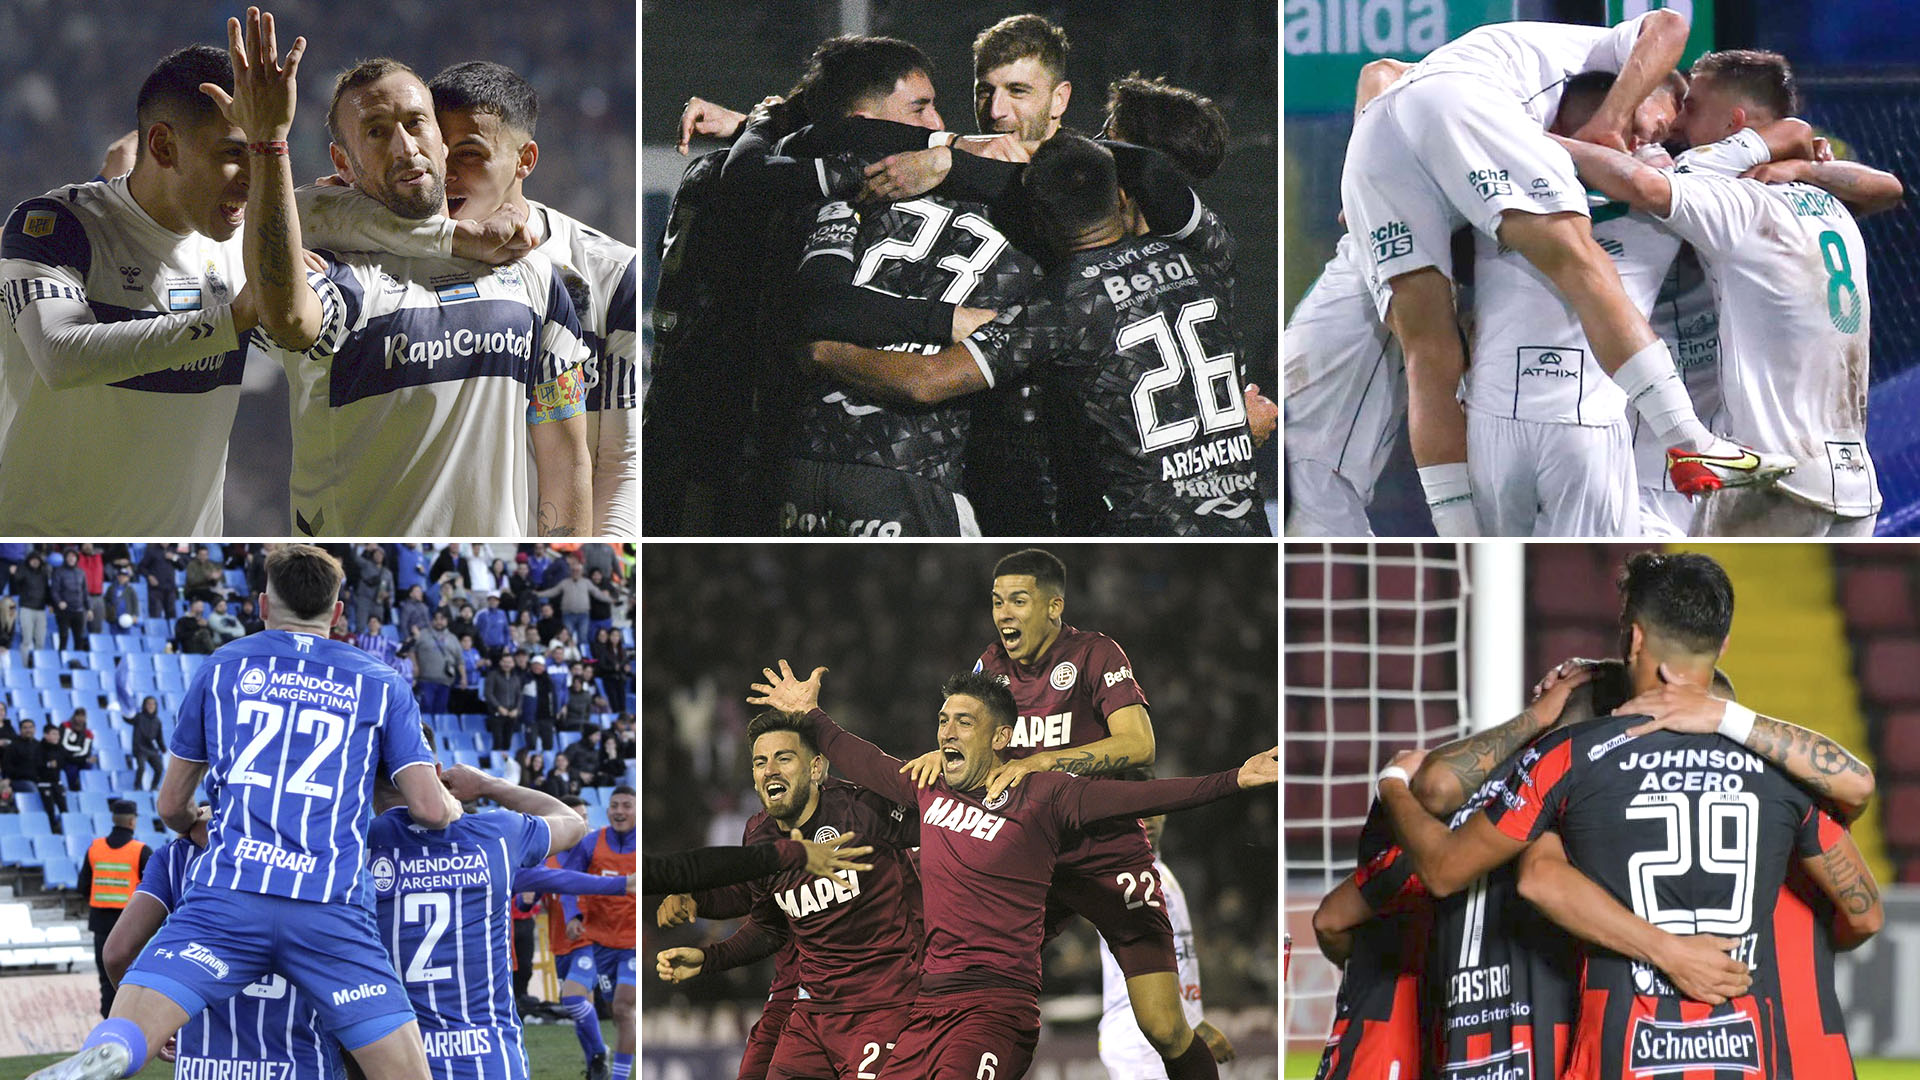 Gymnastics-Godoy Cruz, Sarmiento-Lanús and Banfield-Board of Trustees, the matches of the day